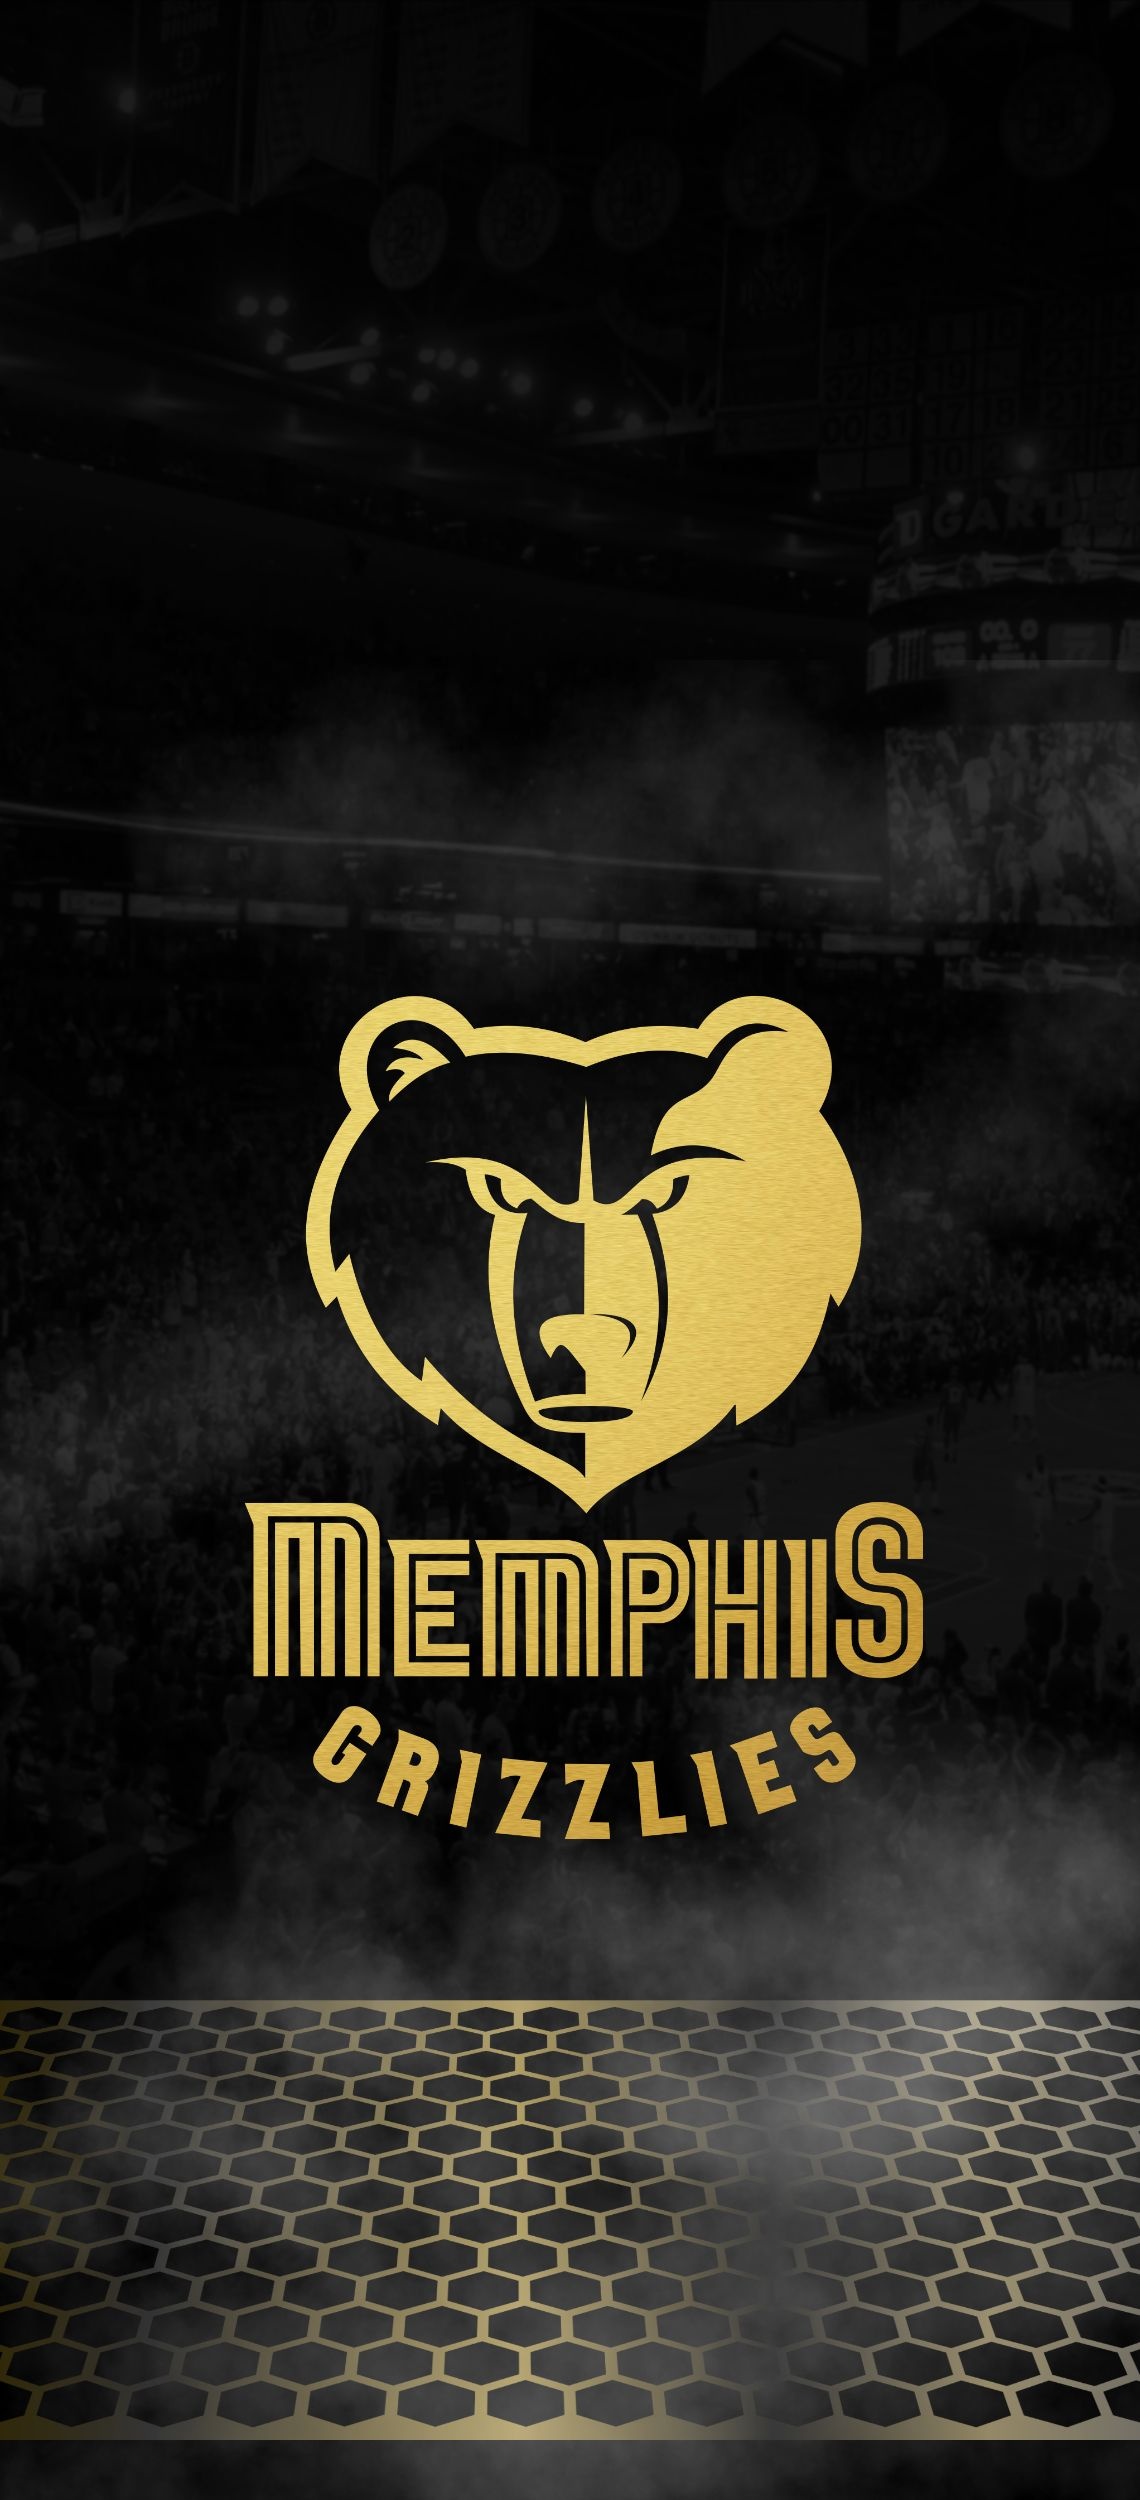 Memphis Grizzlies, Wallpaper background, Basketball team, Grizzly imagery, 1140x2500 HD Phone